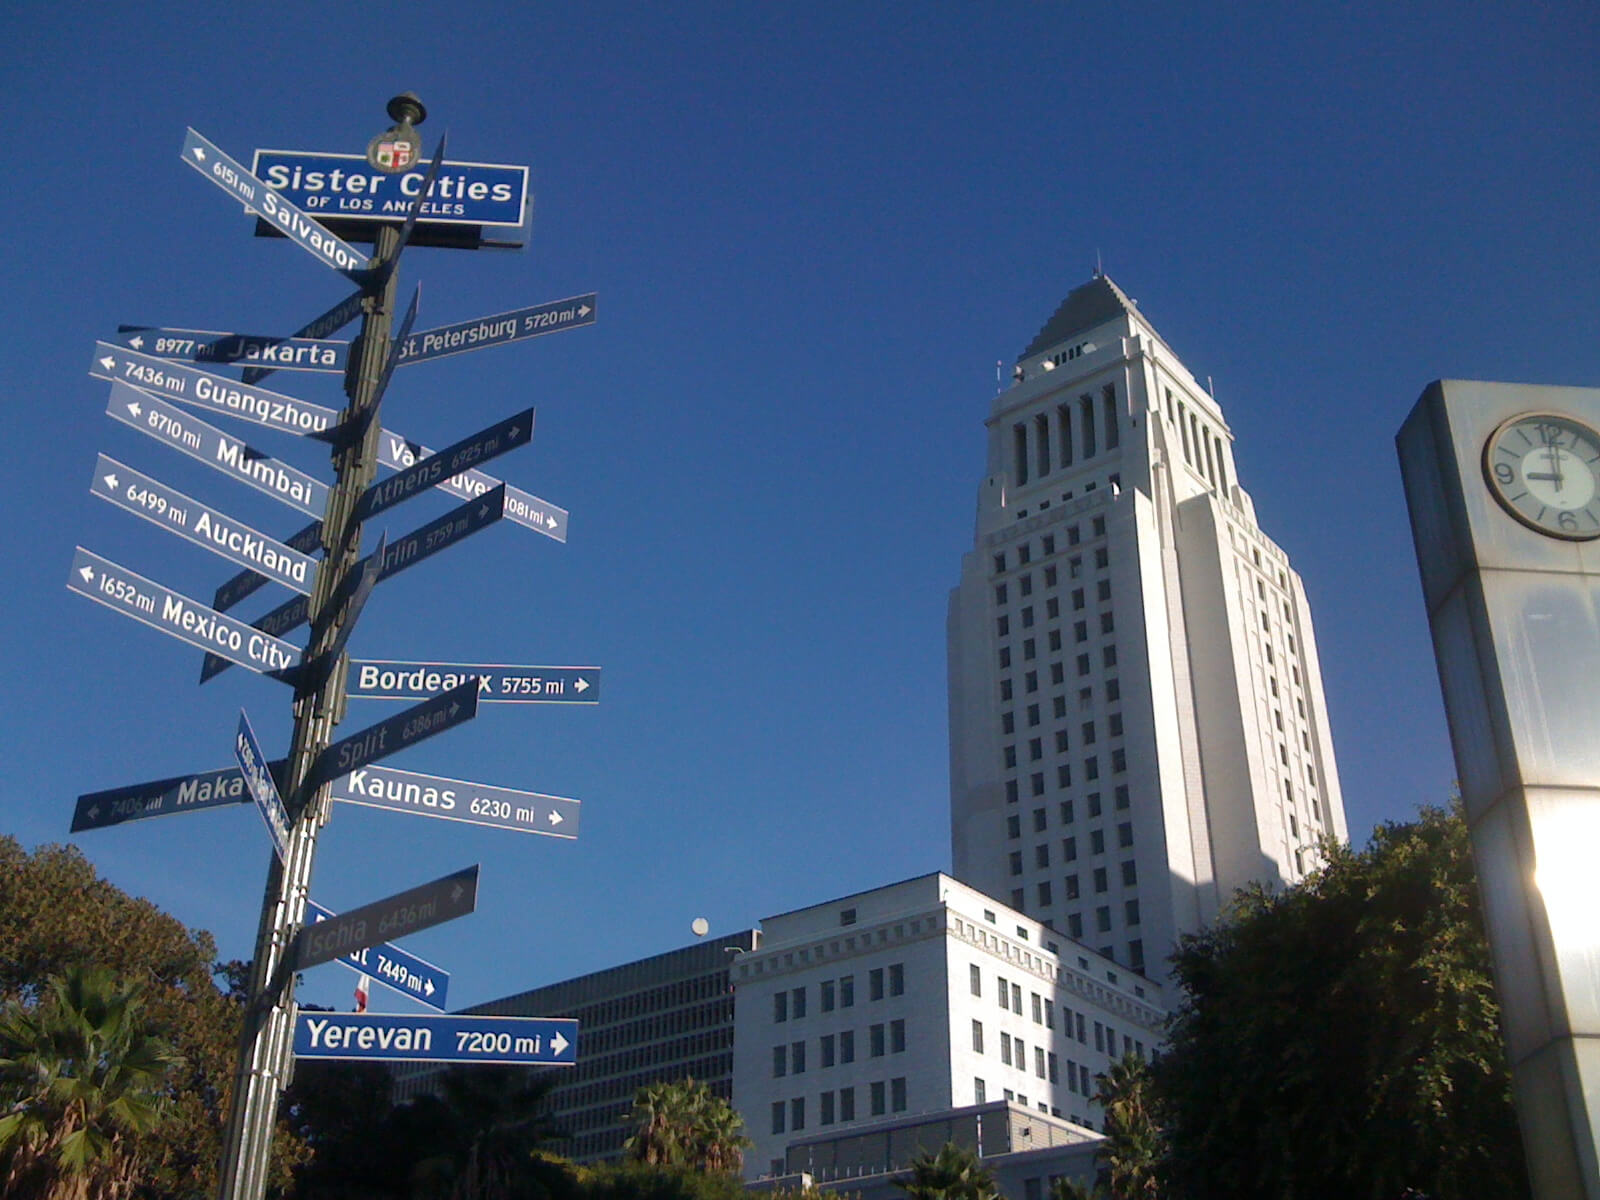 Zwart - Sign downtown Los Angeles with L.A. Sister Cities. David Galvan - Flickr